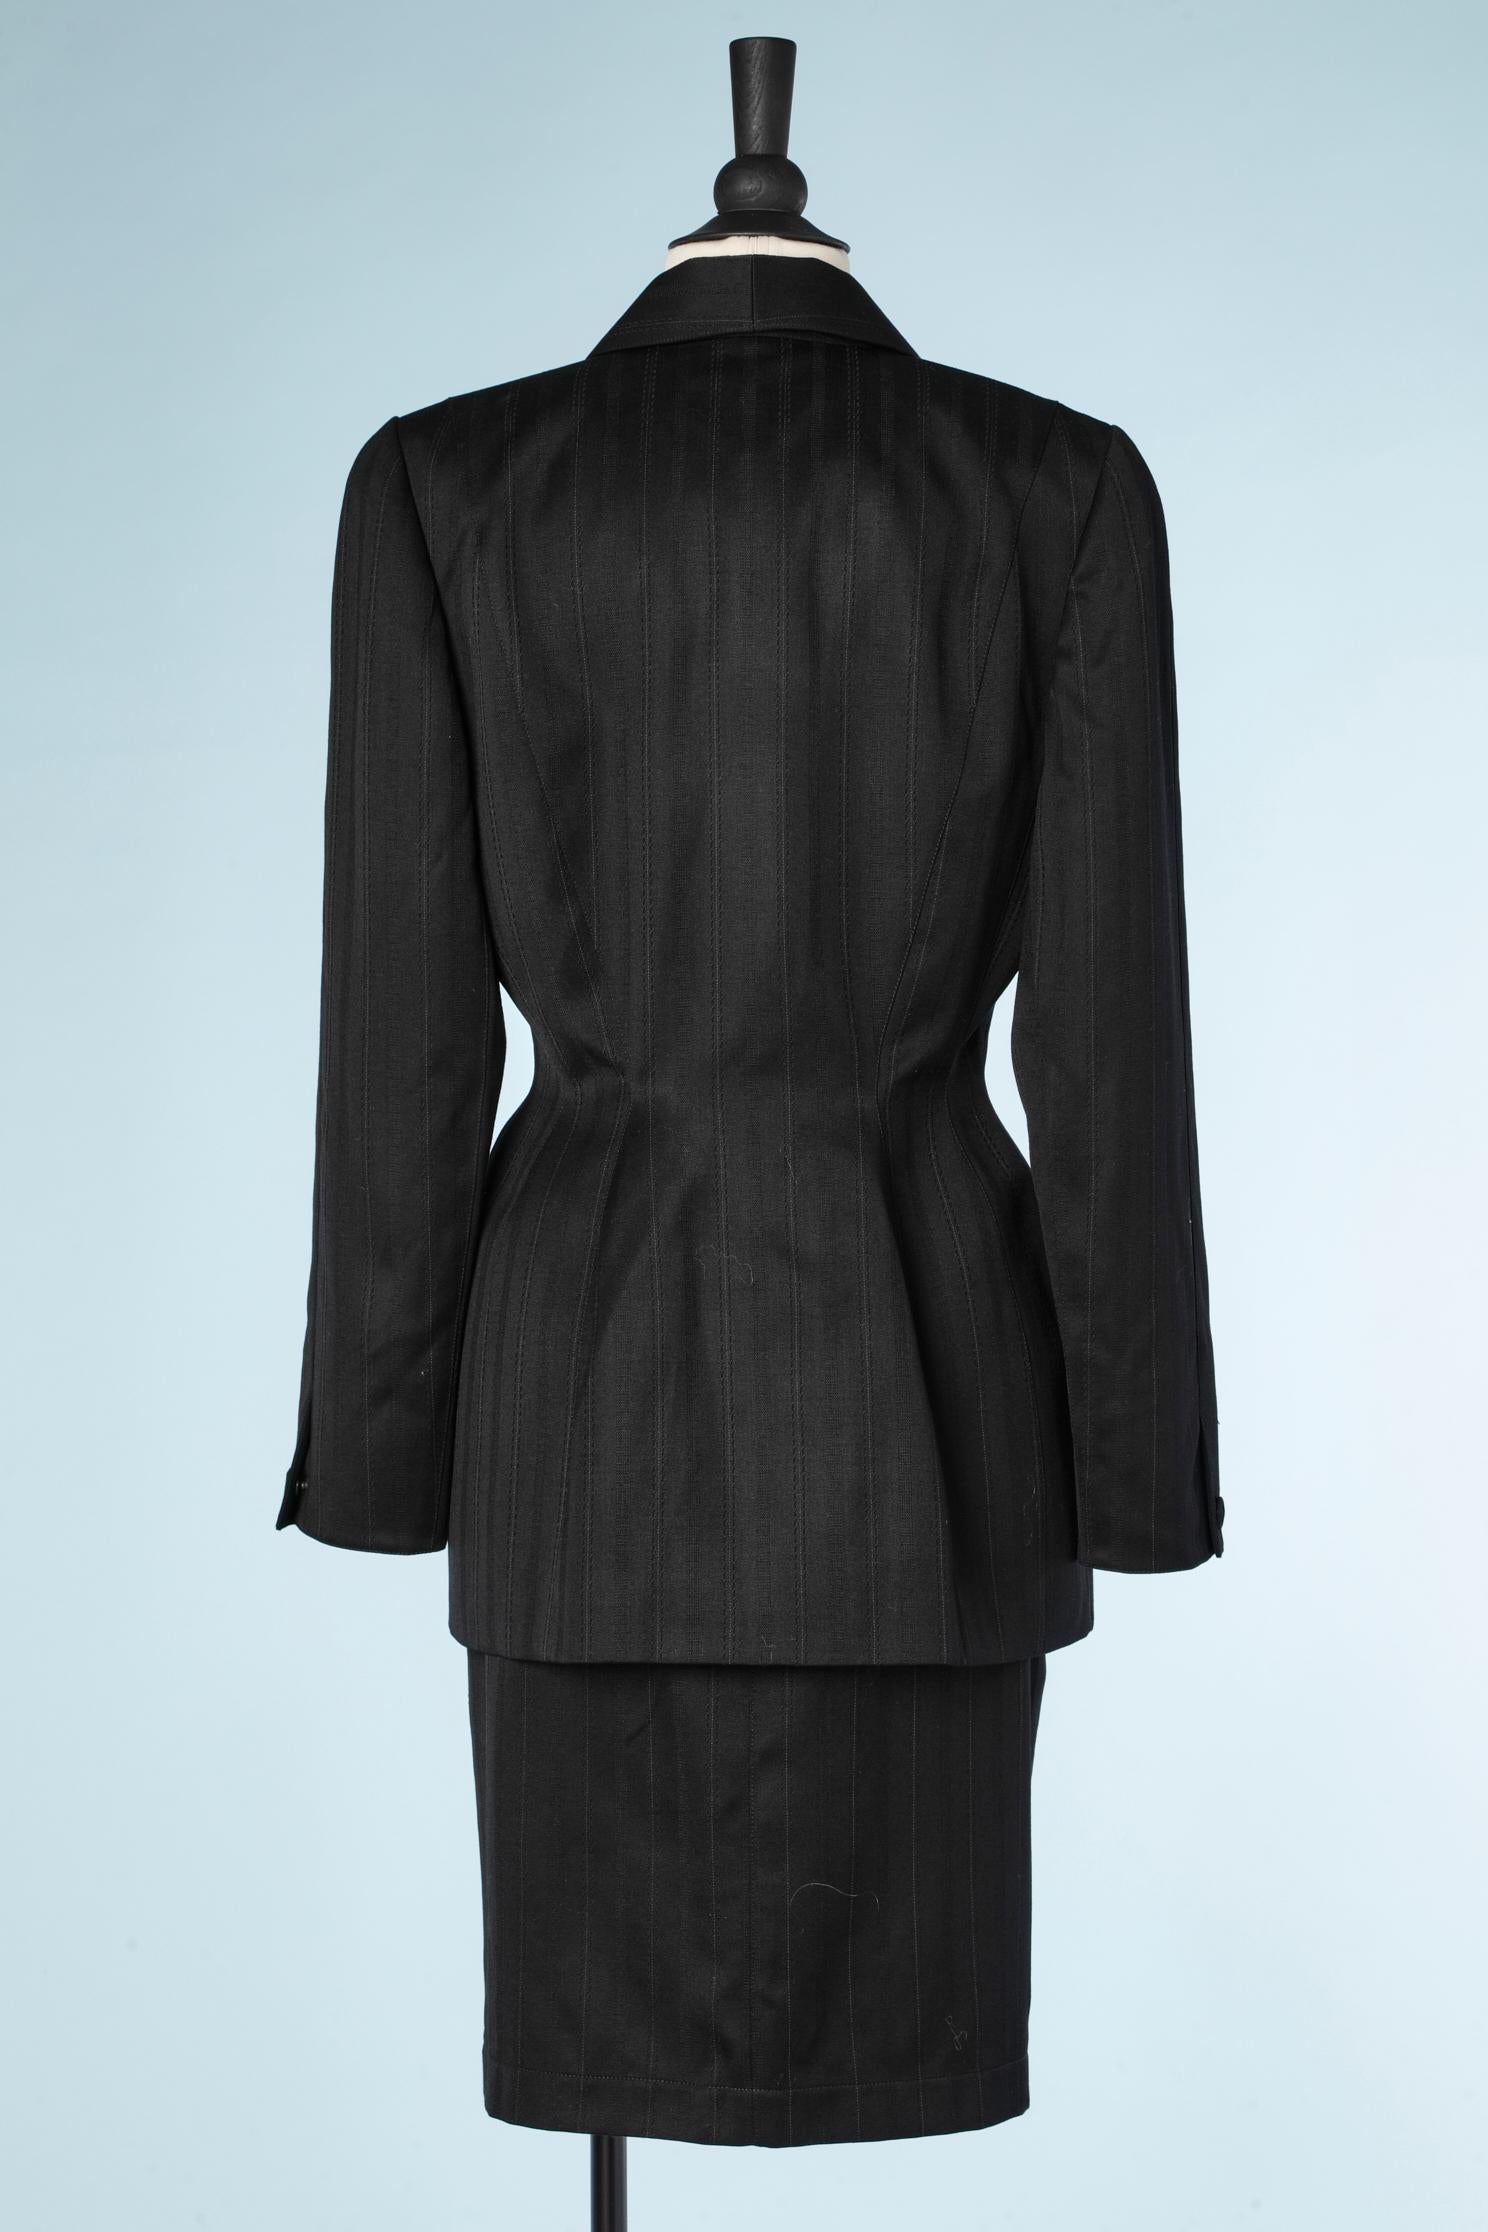 Black double breasted skirt-suit Thierry Mugler  2